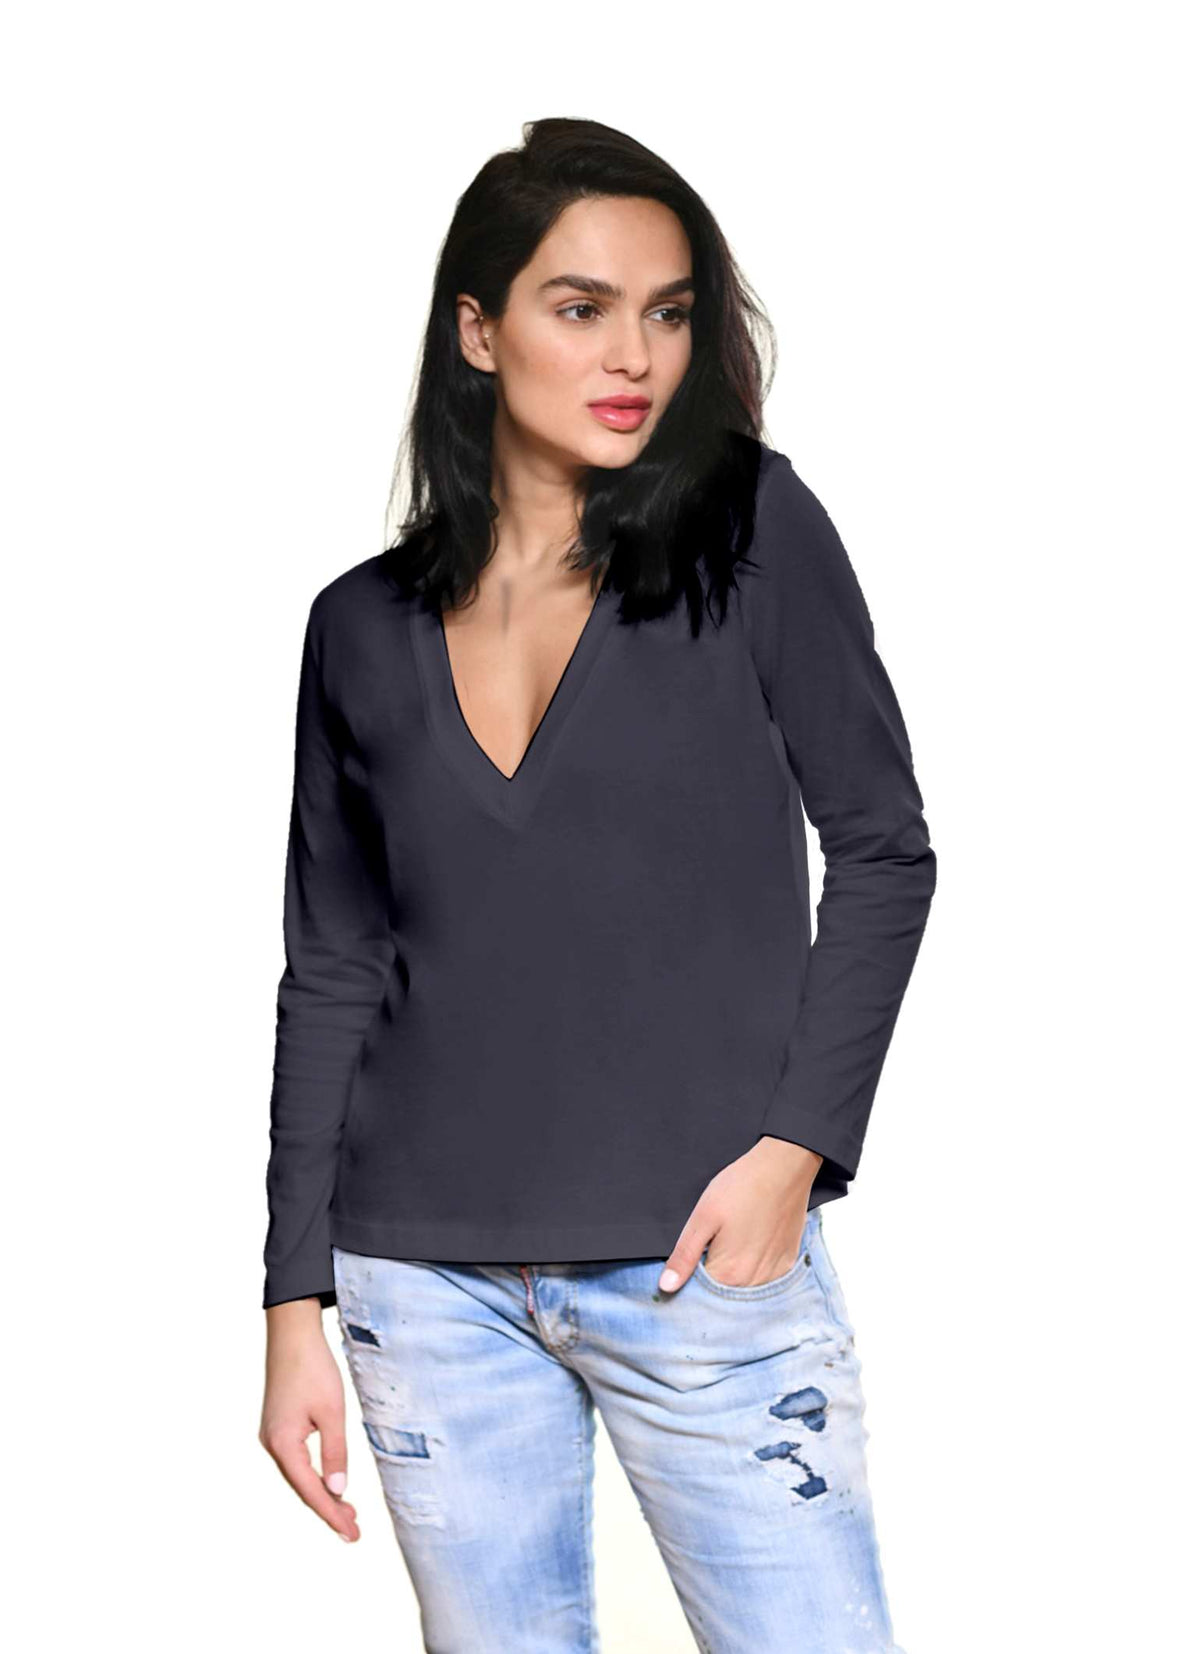 Carmen Sol long sleeve tee womens with v neck in color mid night blue